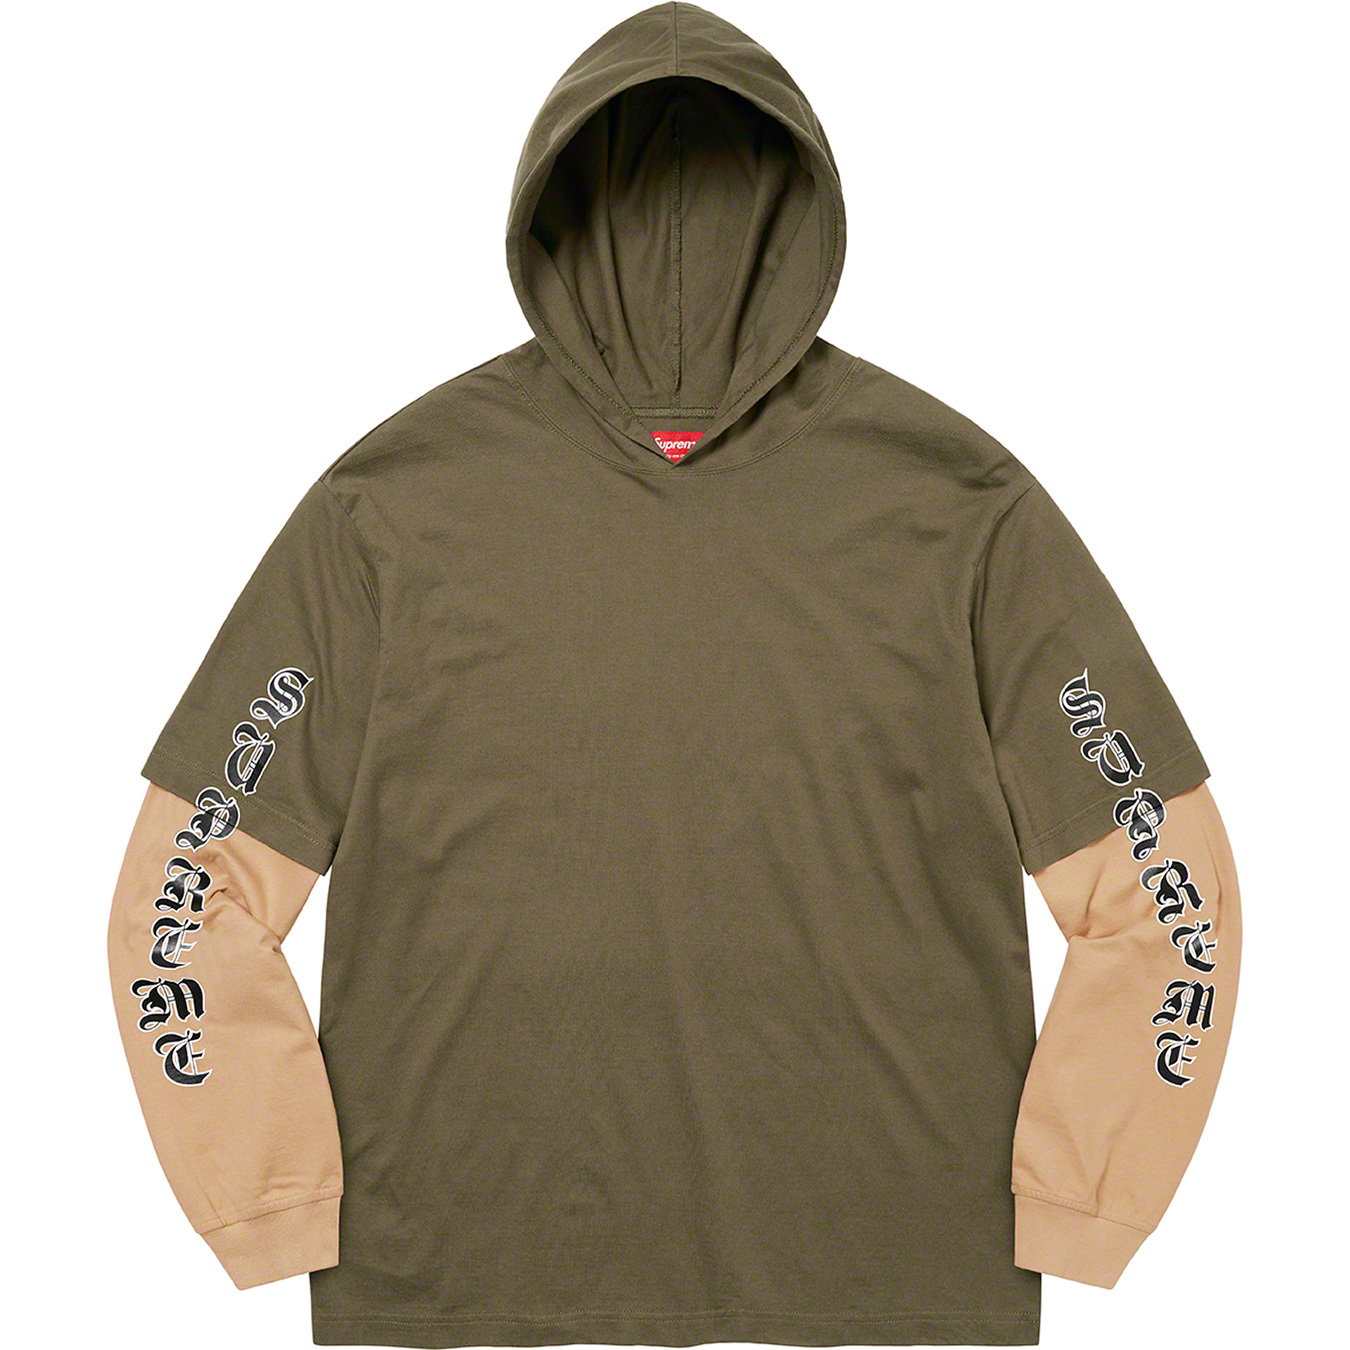 Layered Hooded L S Top - fall winter 2022 - Supreme